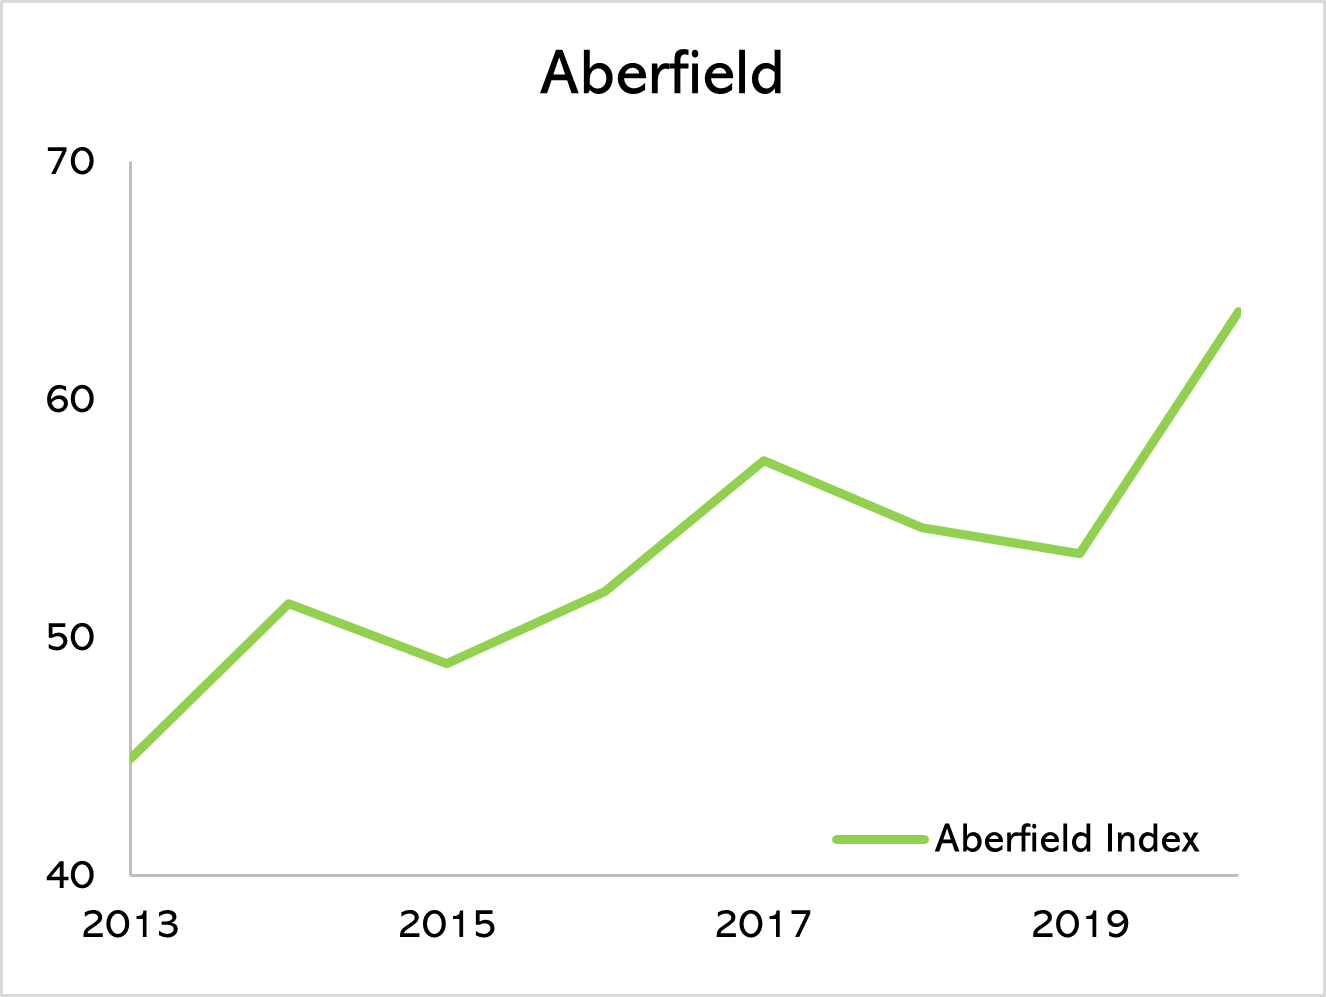 Innovis breeding sheep chart showing improvements on the Aberfield sheep index